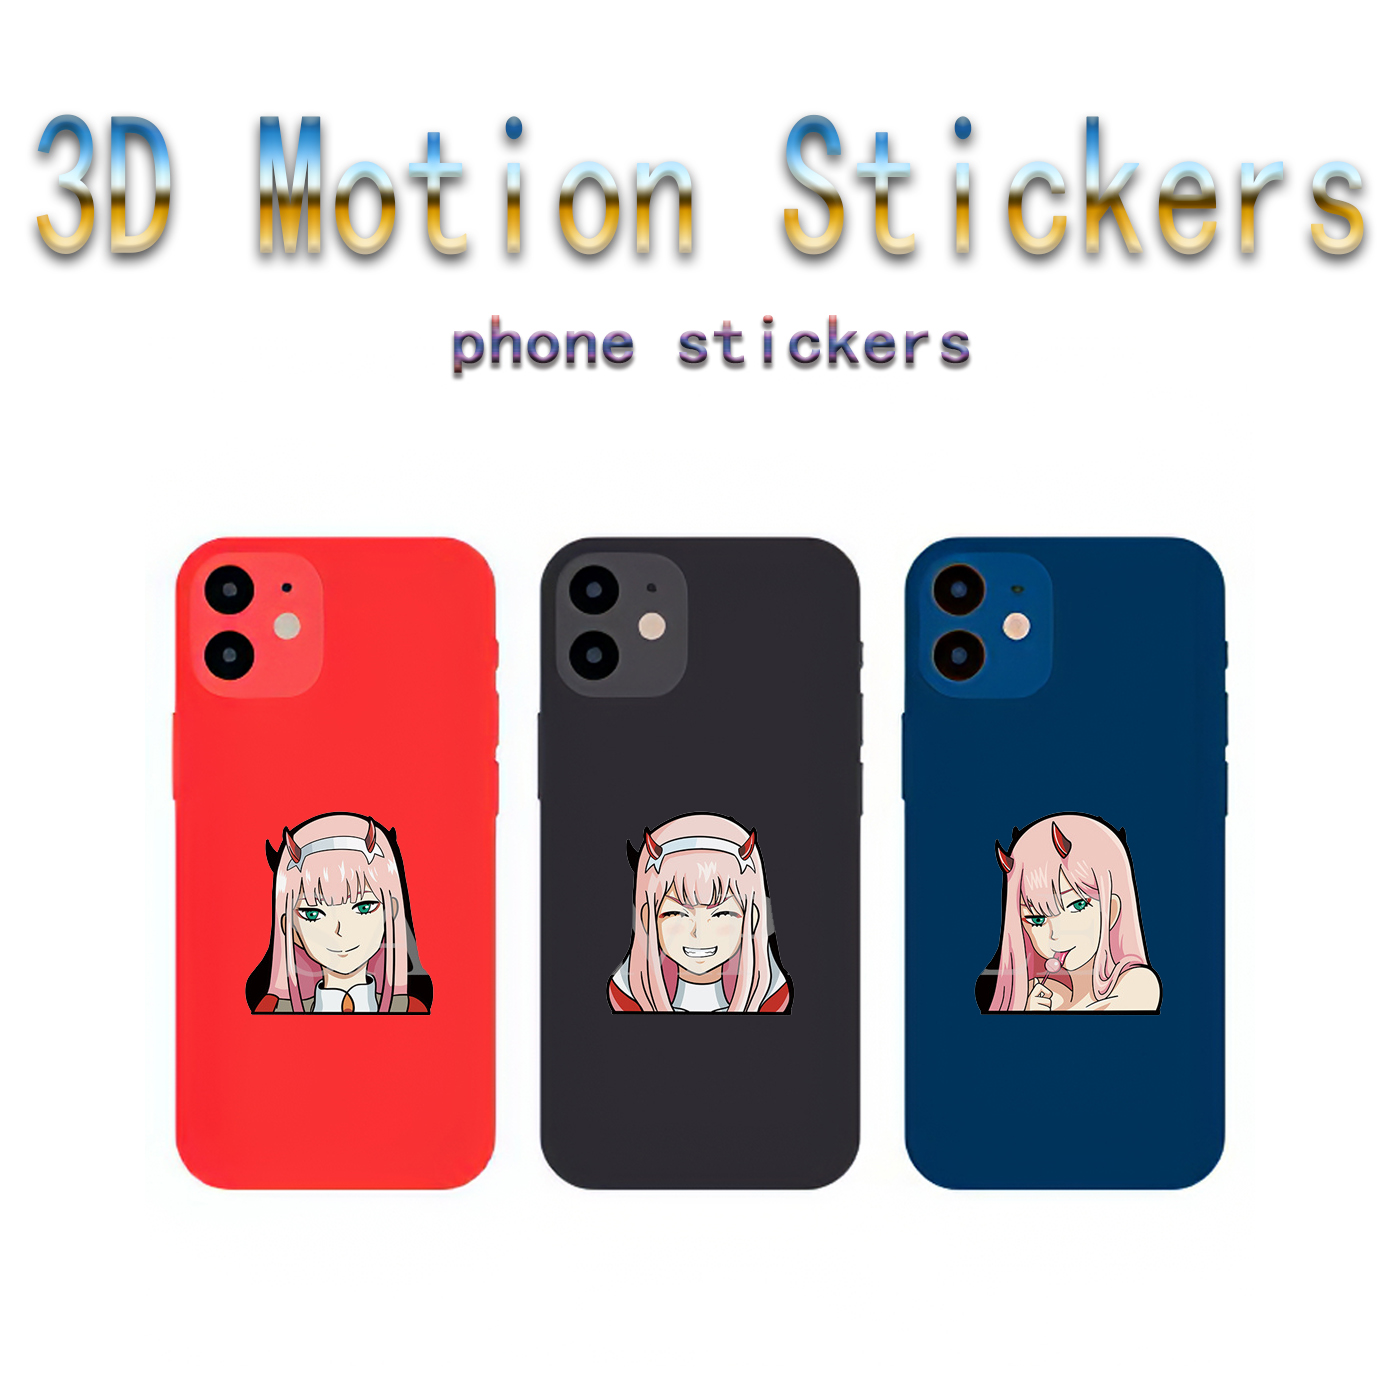 Darling In The Franxx anime 3d sticker price for 10 pcs